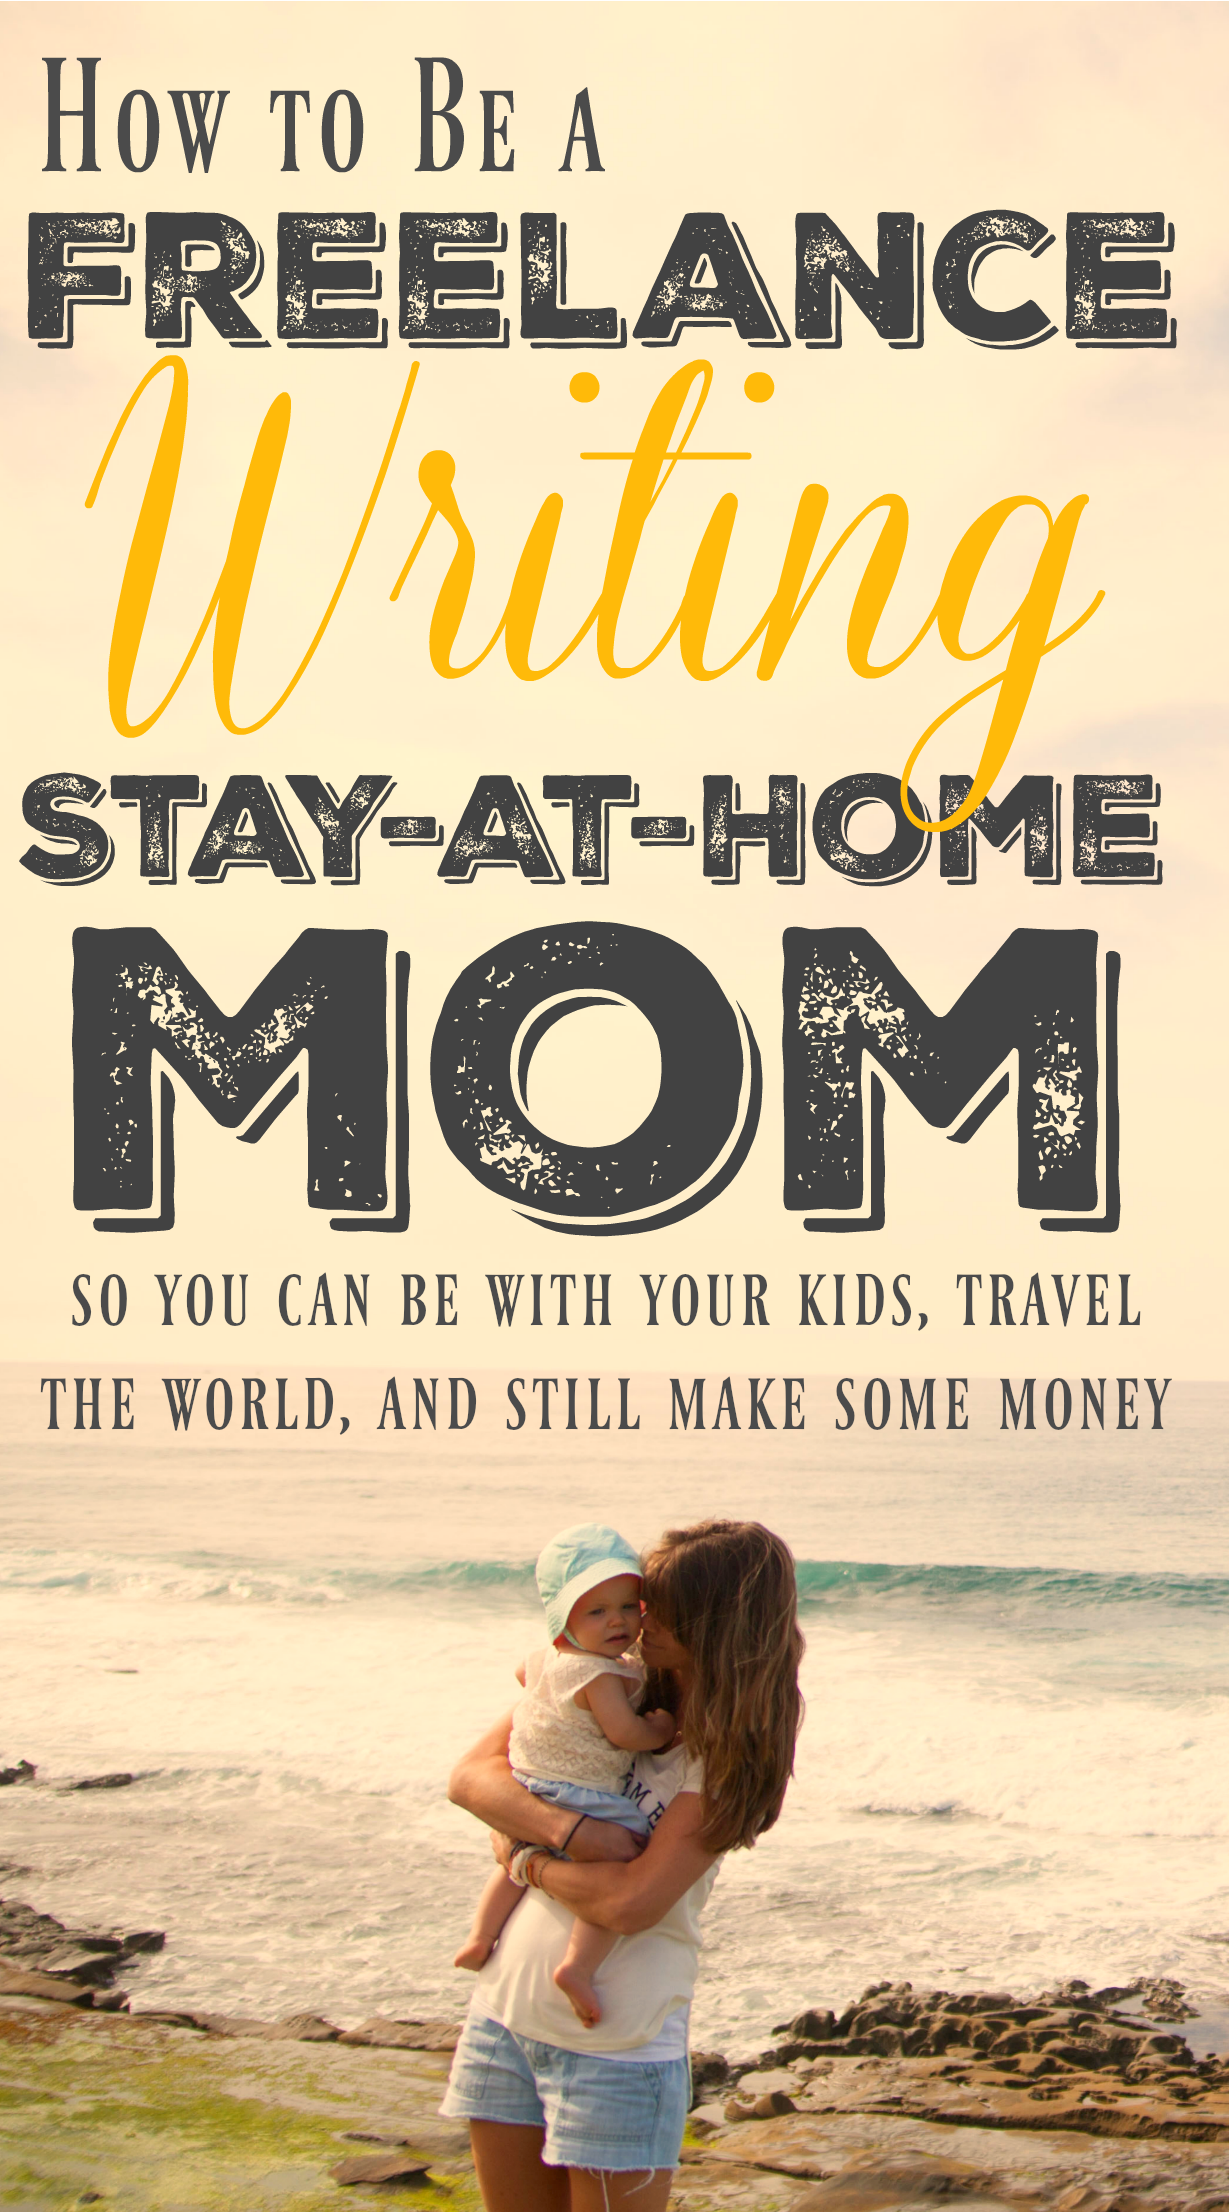 I bet you'd be surprised how many freelance writing jobs for moms are actually available!  A lot of employers know that moms are hard-working, educated individuals that chose to leave the workforce, so they look to them to get a lot of work done.